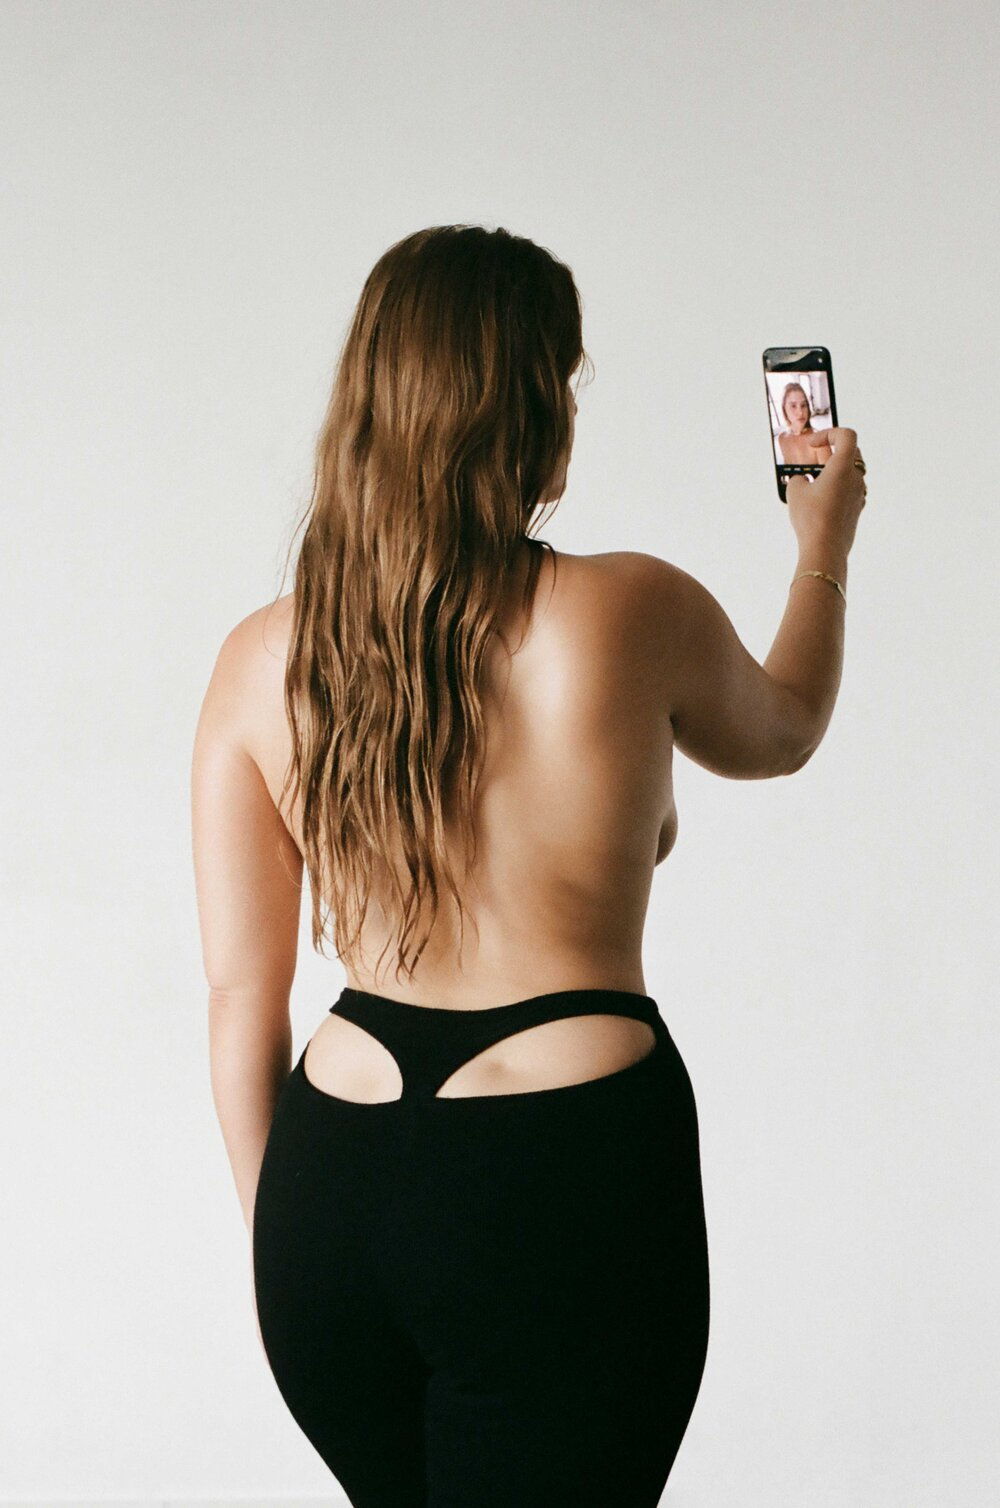 Whale Tail G-Strings Are Back, But Should You Wear One?